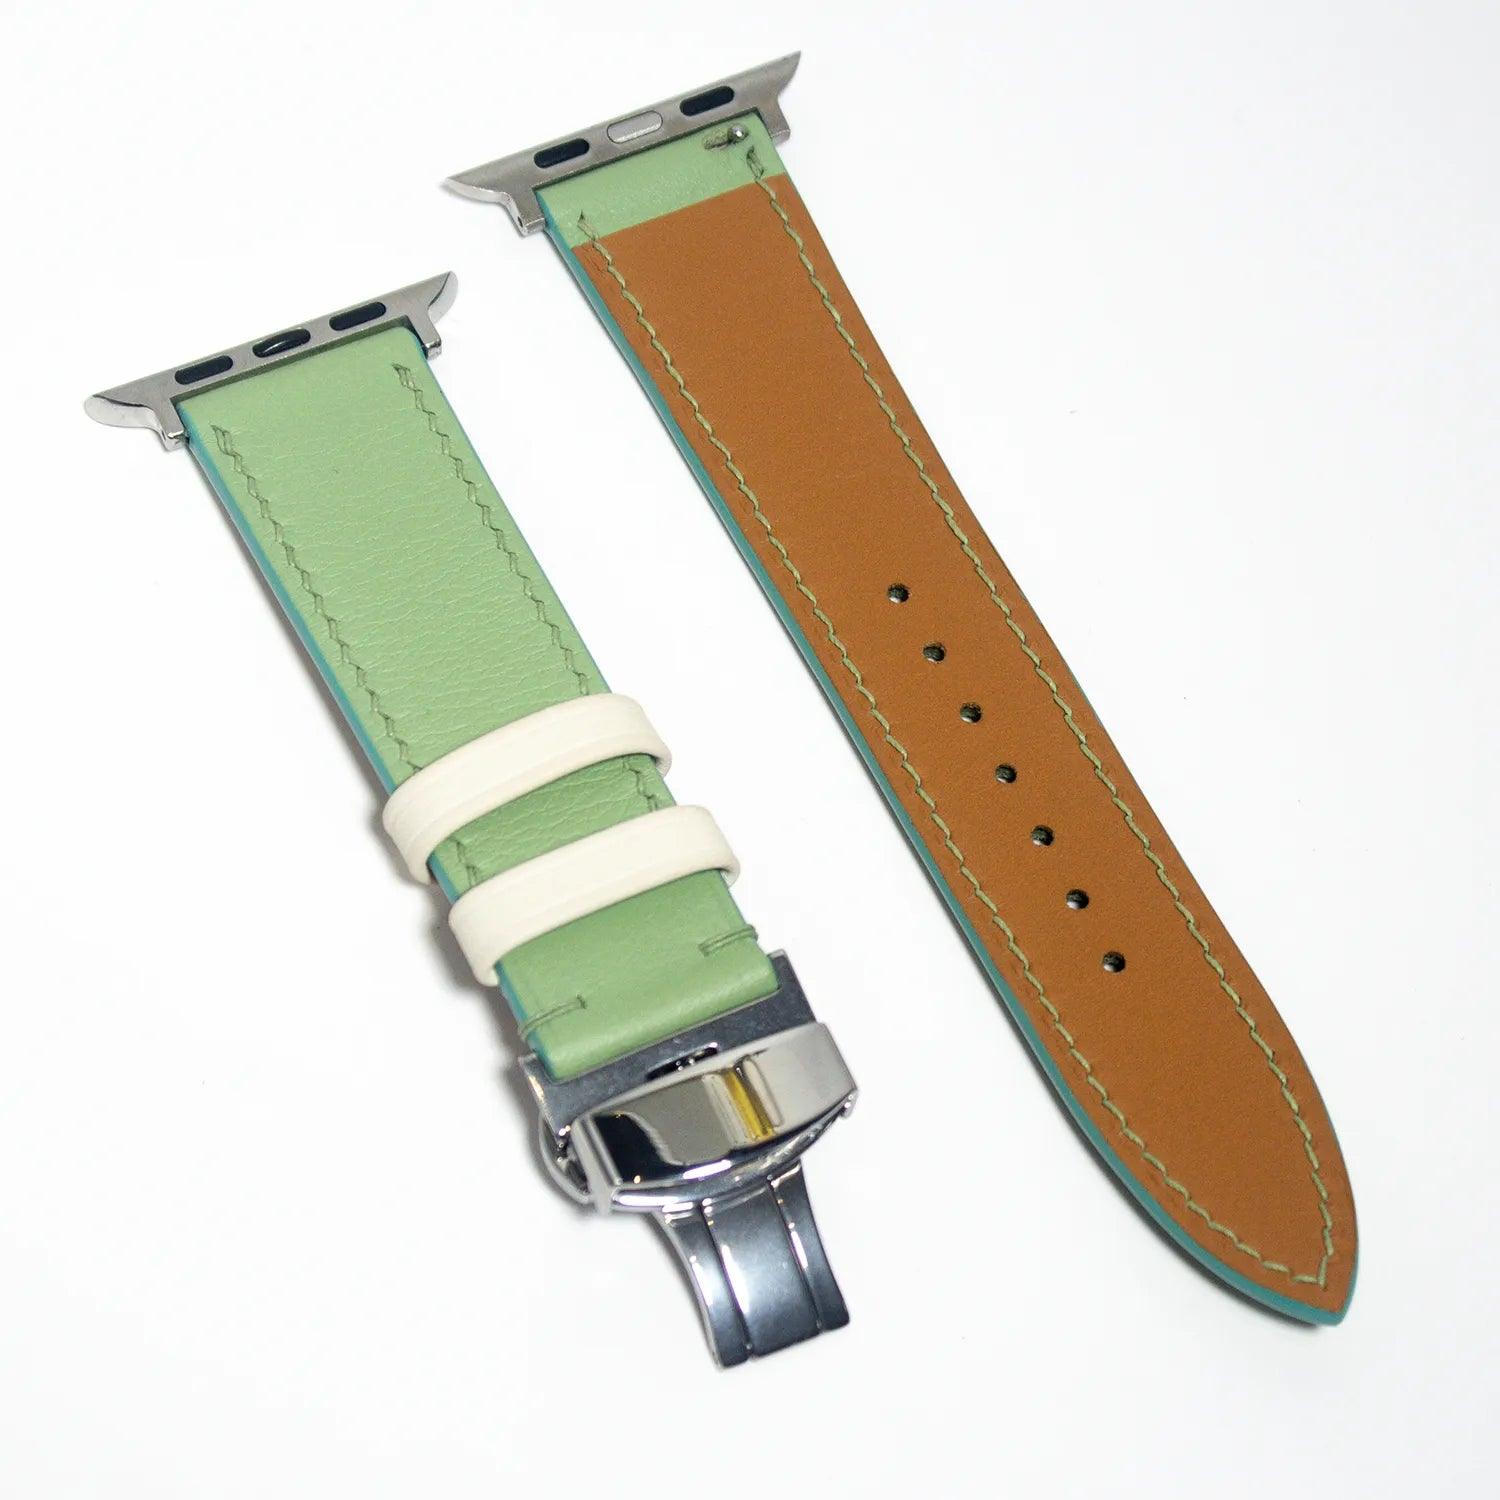 Stylish leather watch bands in mint green, made from Swift leather, ideal for fashion-forward Apple Watch owners.